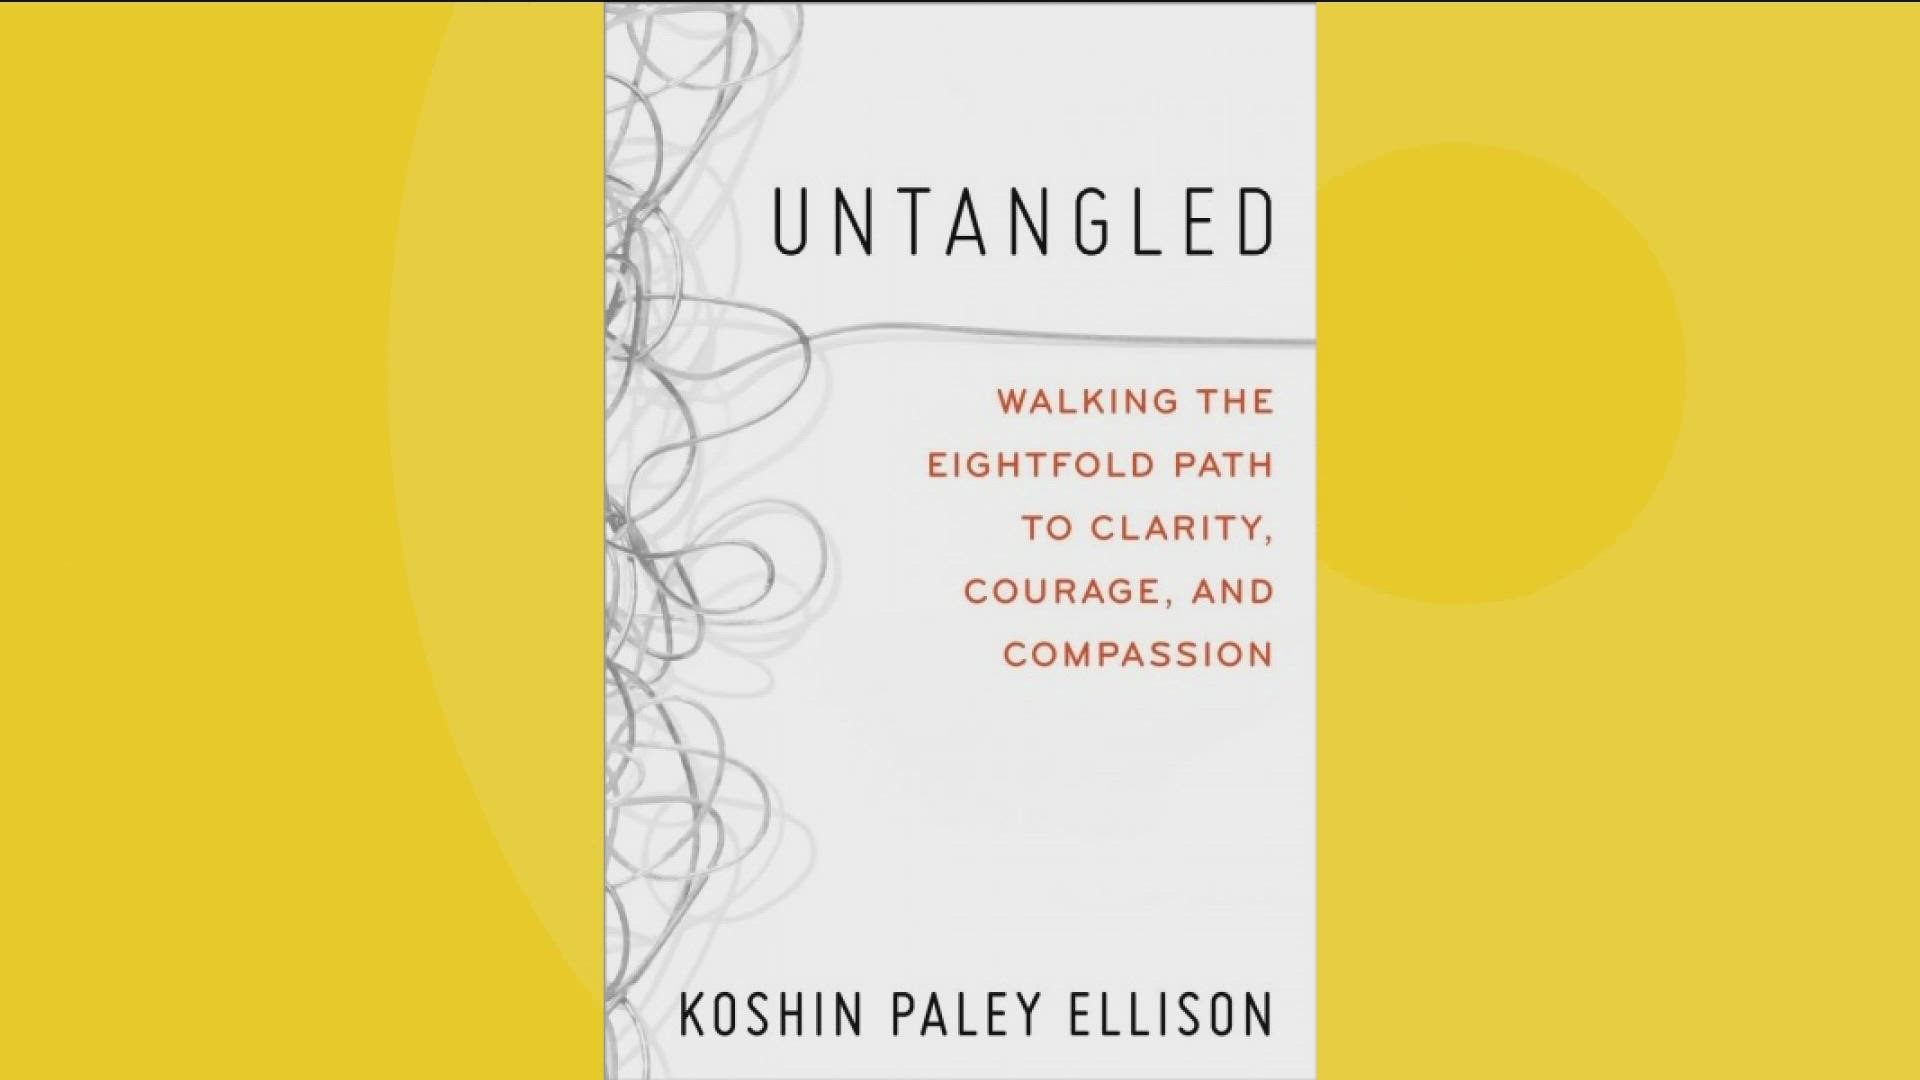 Pick up your copy of Koshin's latest book "Untangled" wherever books are sold.